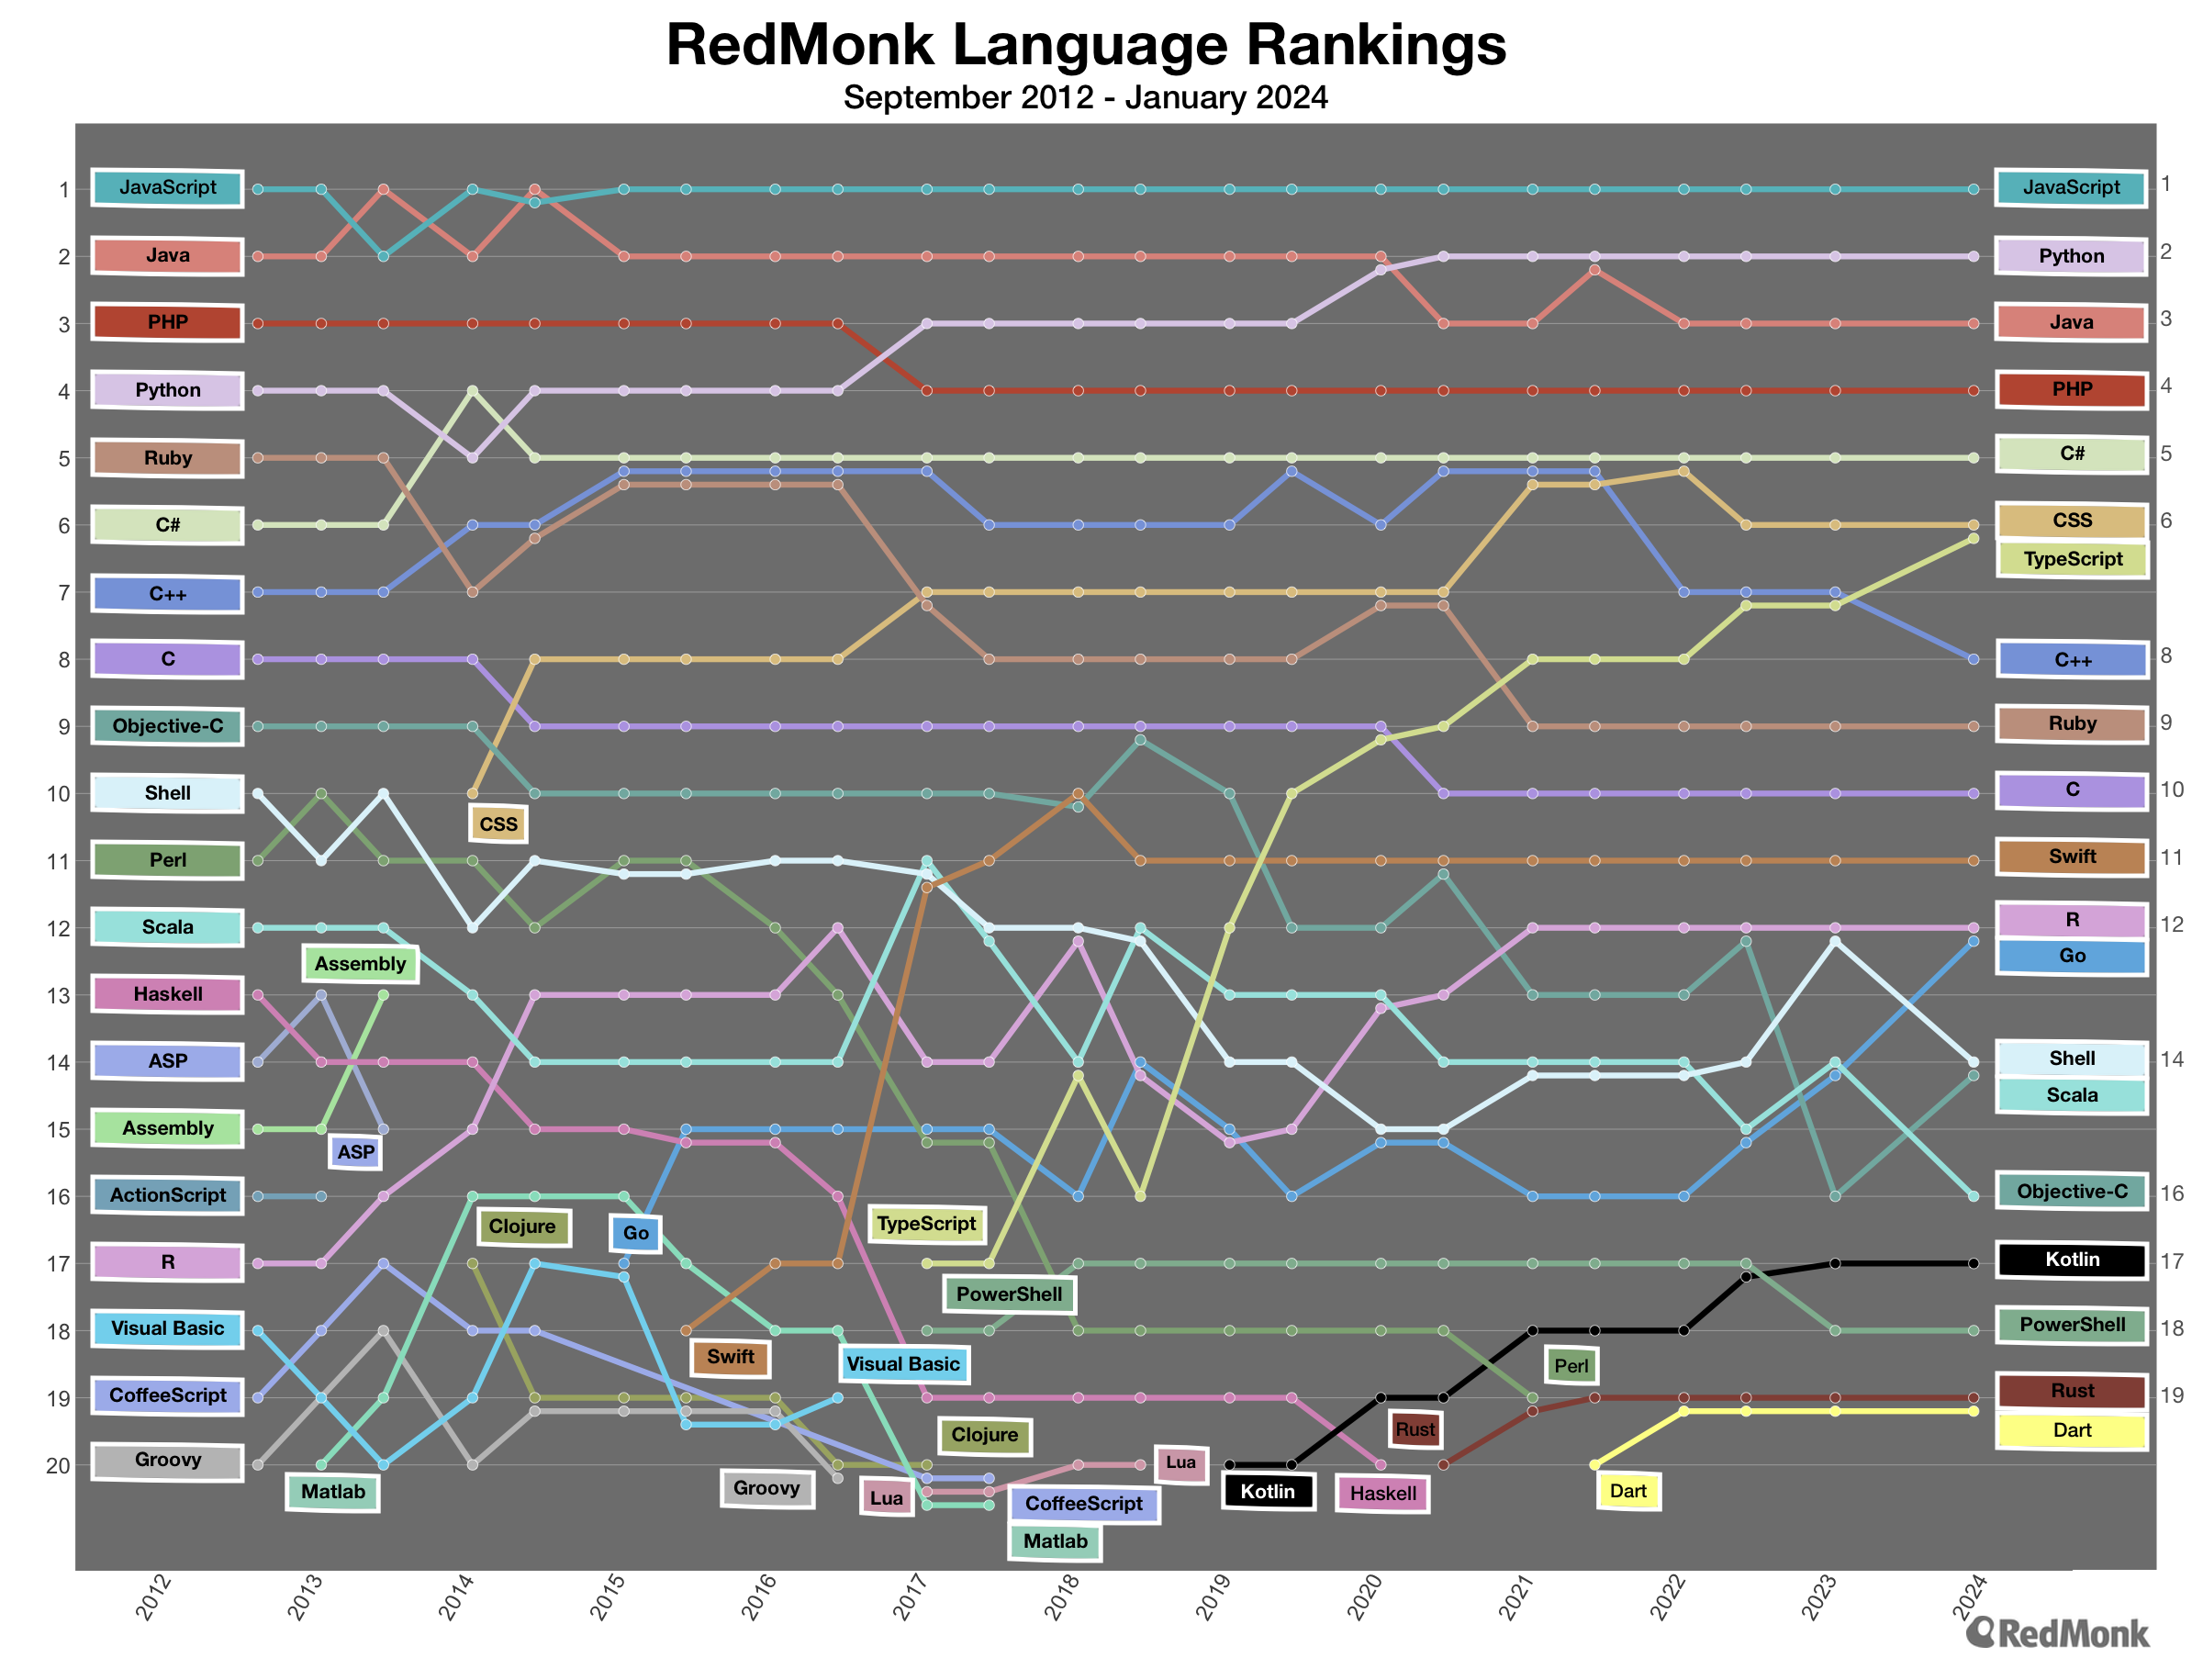 Top 20 languages over time. X-axis shows time ranging from 2012 to 2024. y-axis shows ranks 1-20. languages are plotted by rank for each semi-annual iteration of the rankings.